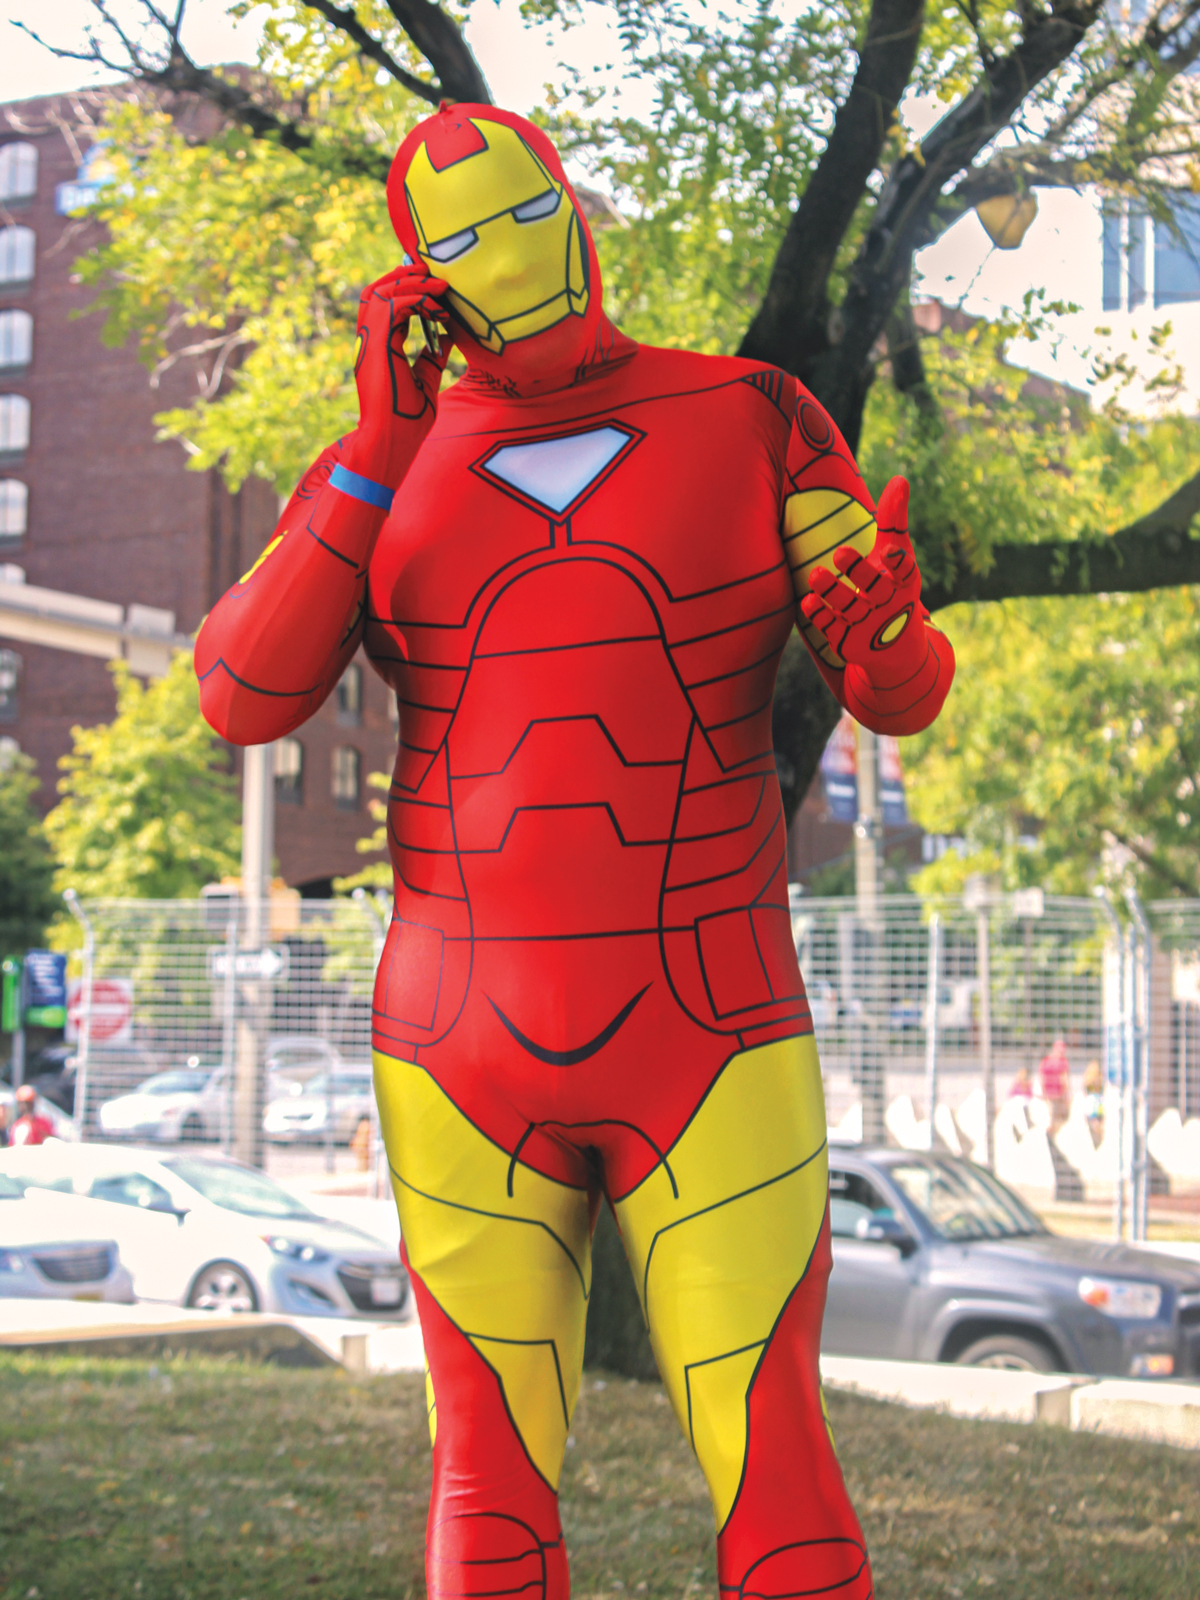 A man in a spandex Iron Man costume takes a phone call.